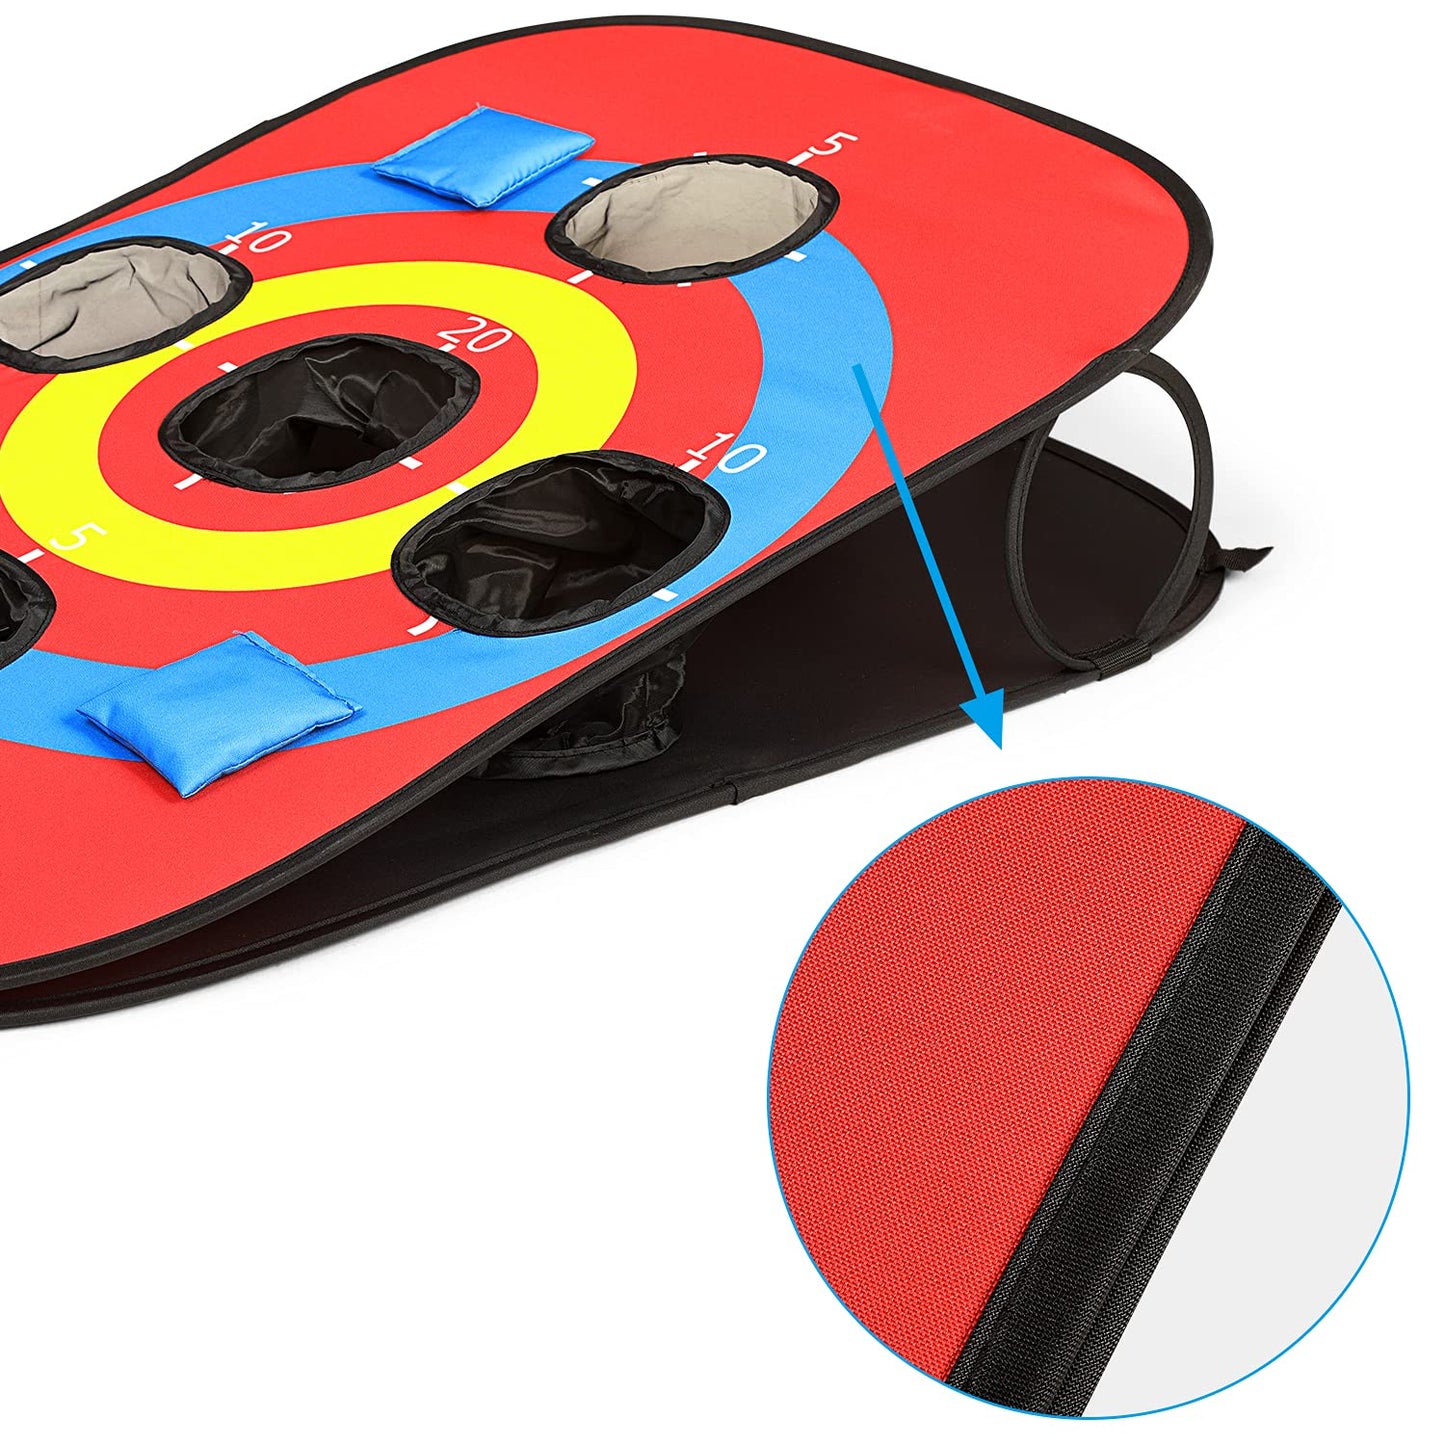 G4Free Portable Collapsible 5 Holes Cornhole Game Set with 8 Bean Bags